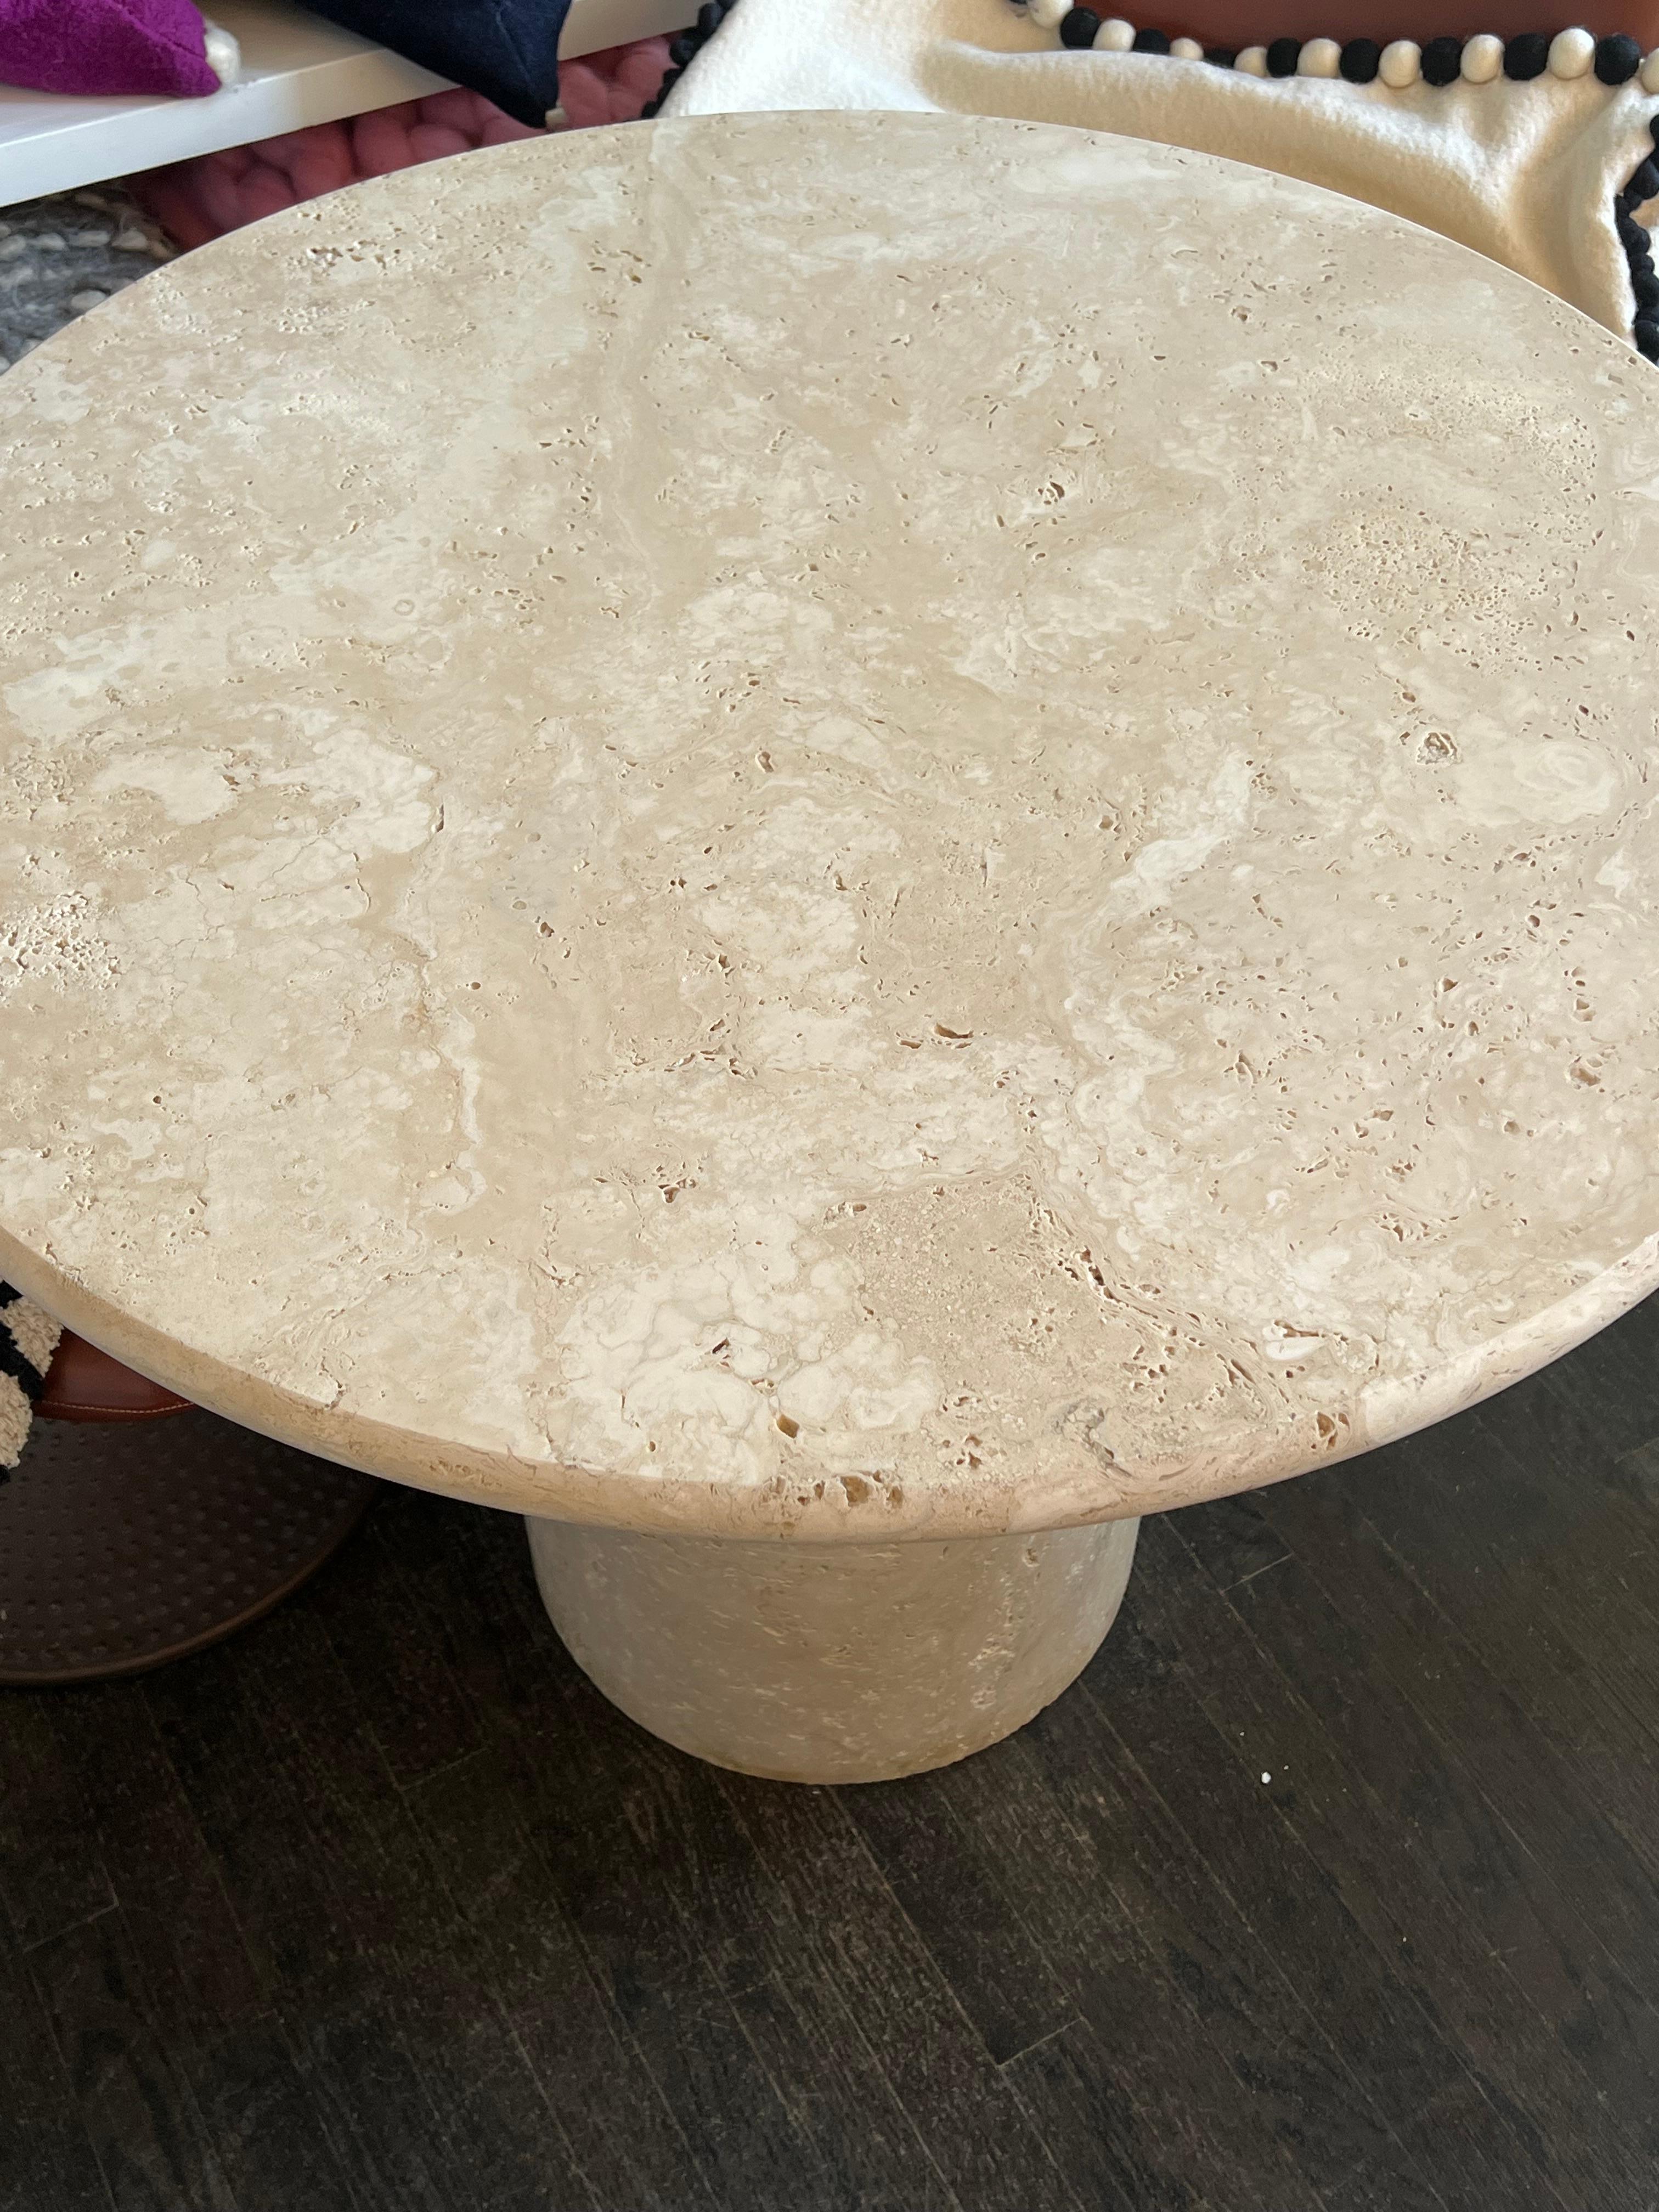 White Roman travertine bistro table by Le Lampade.
Round travertine top supported by a travertine column shaped base. These tables can be custom made.